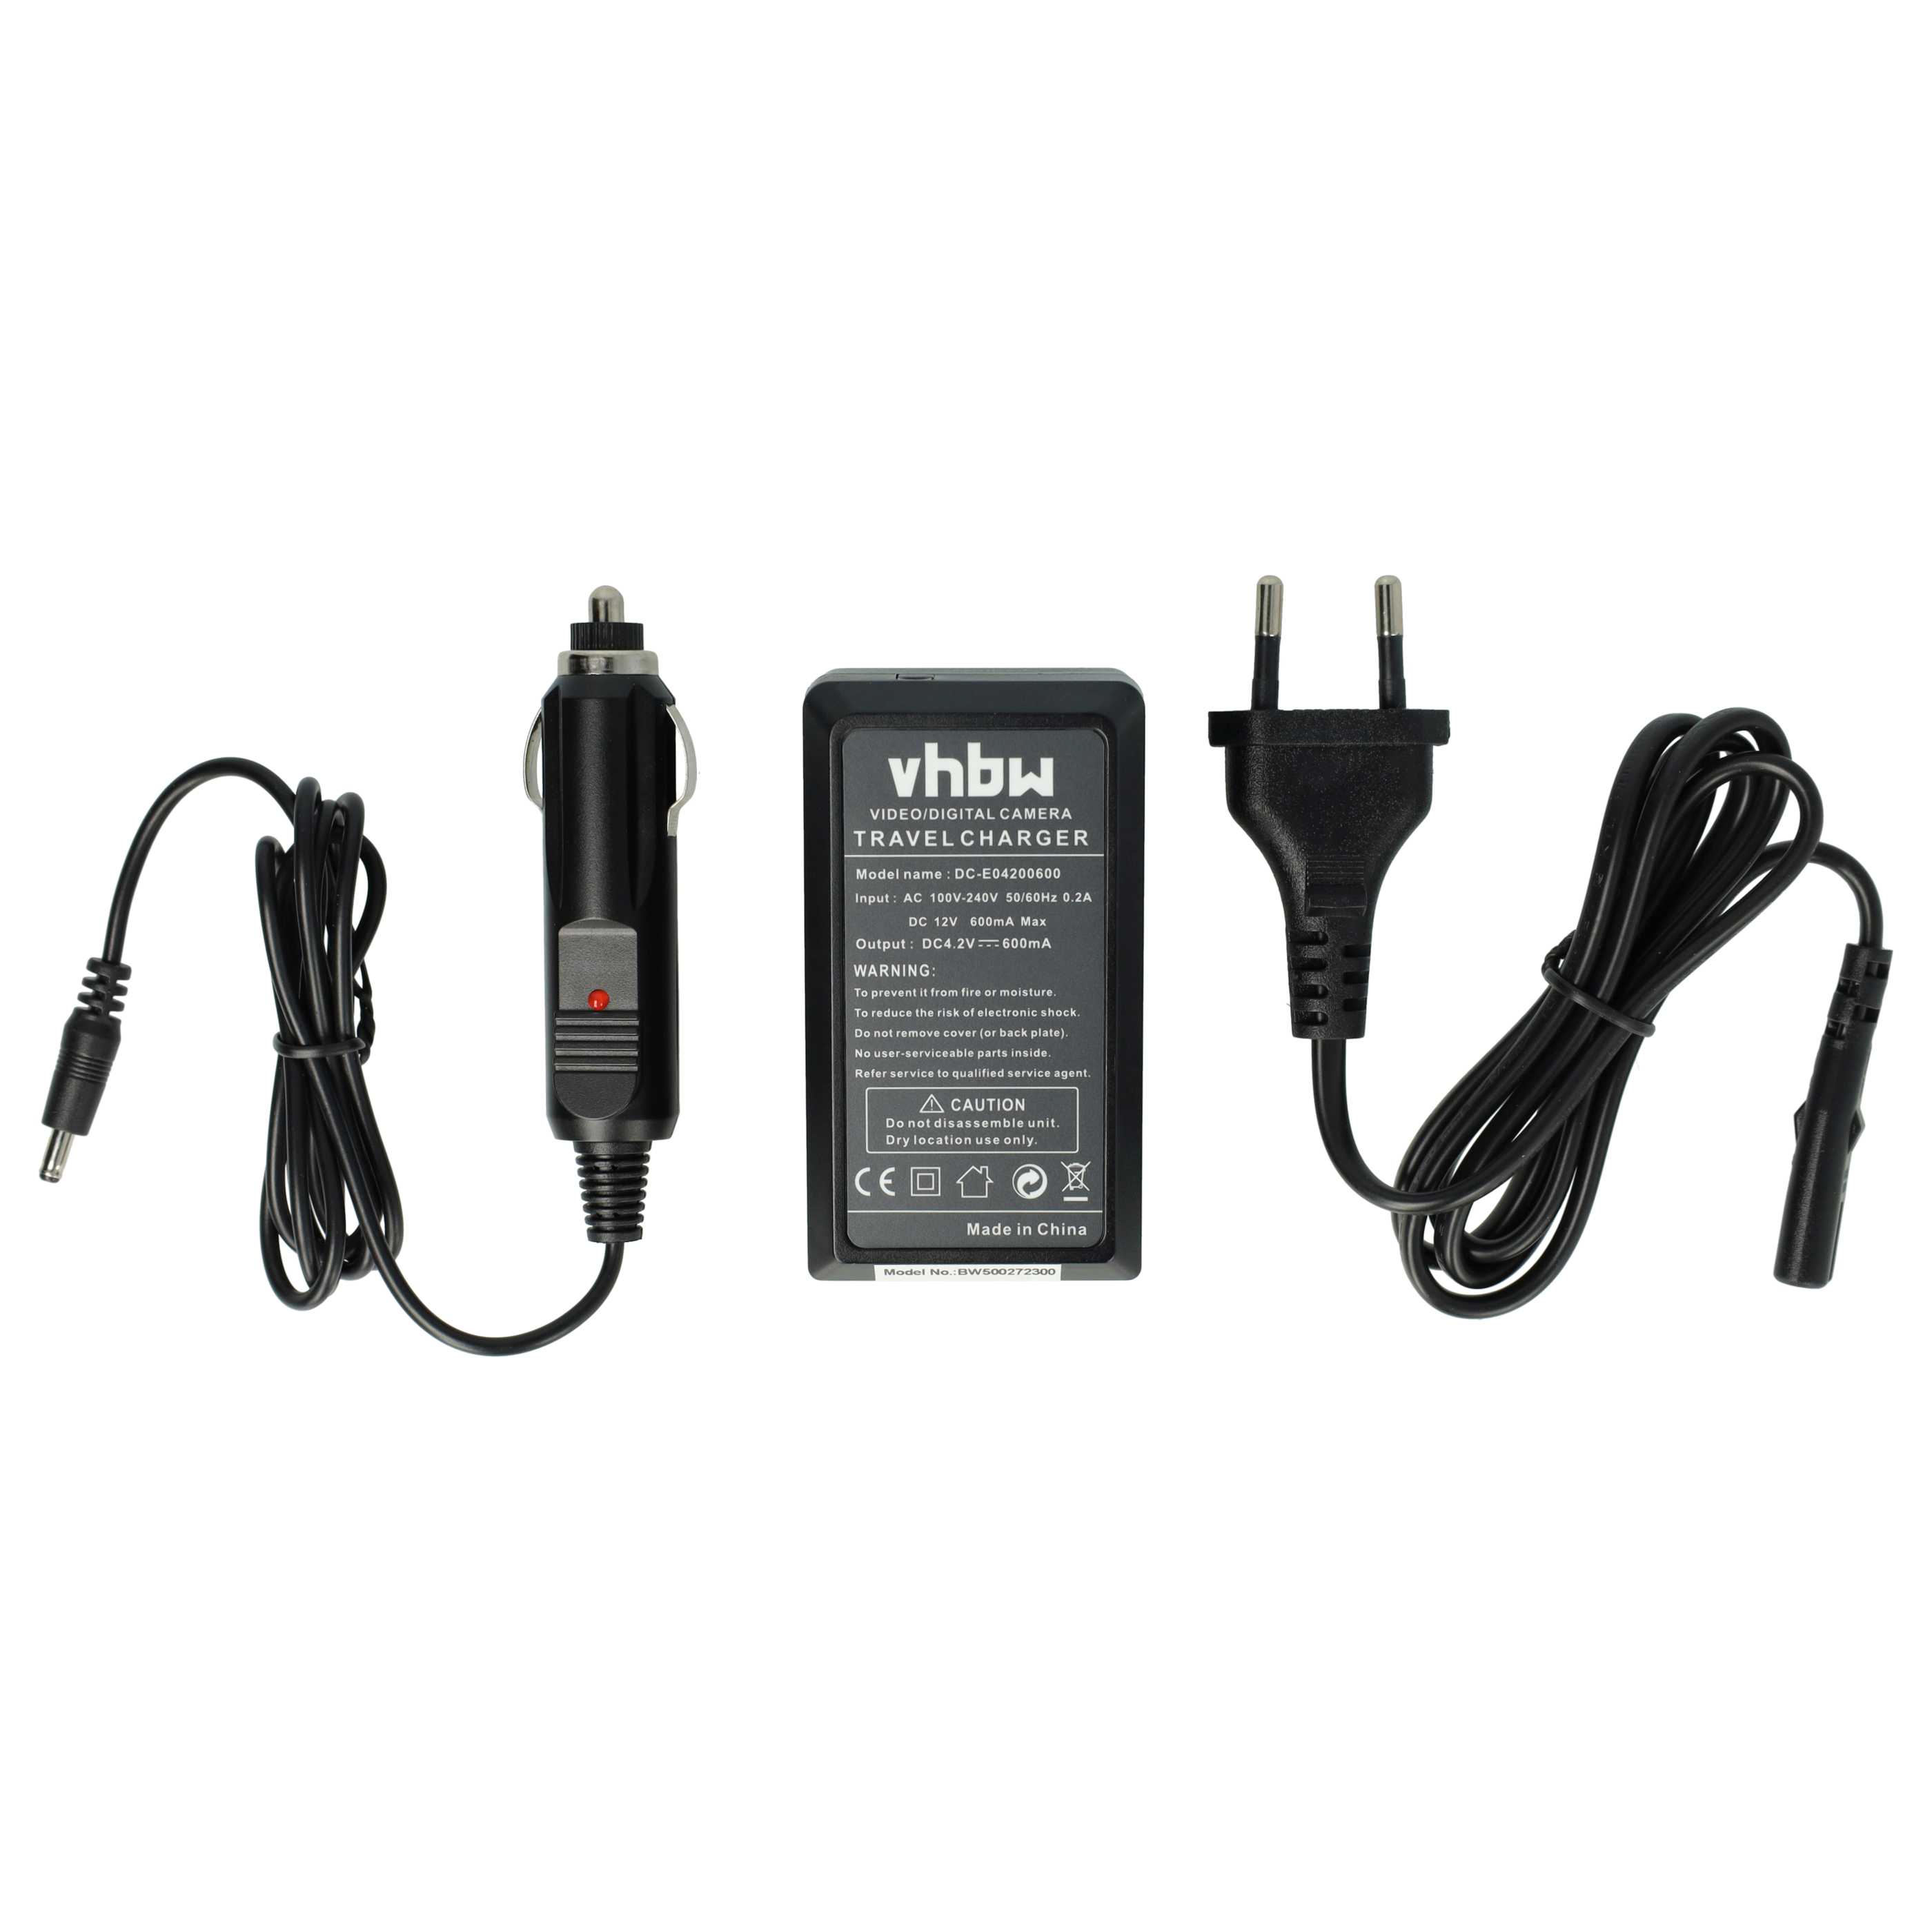 Battery Charger suitable for Coolpix 3700 Camera etc. - 0.6 A, 4.2 V